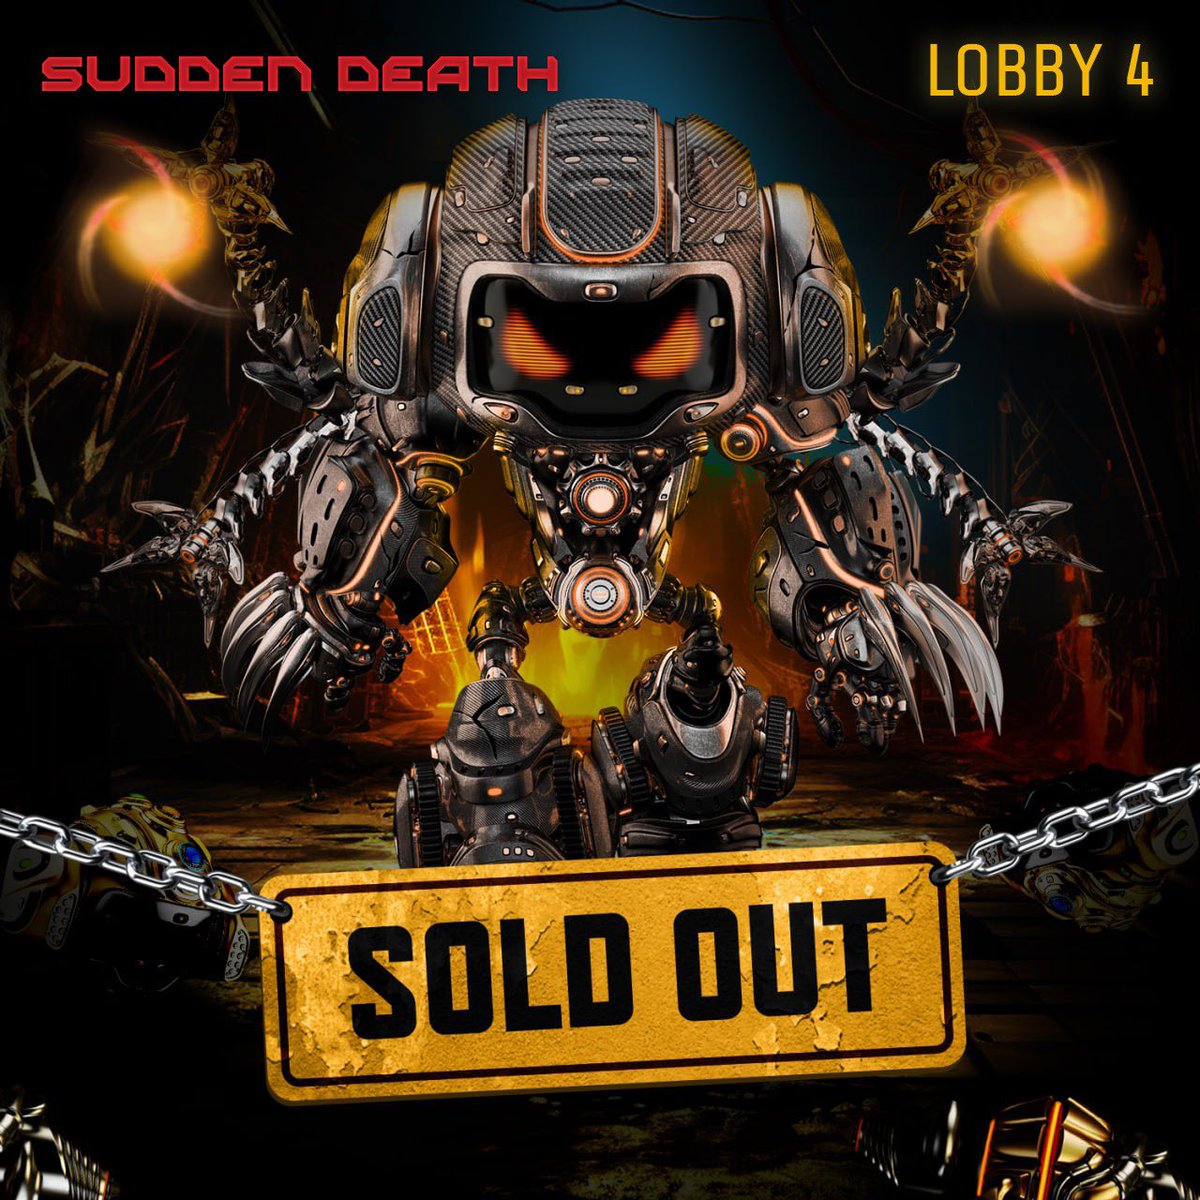 SDT 4 is SOLD OUT #SuddenDeath Tournament date, and time TBA